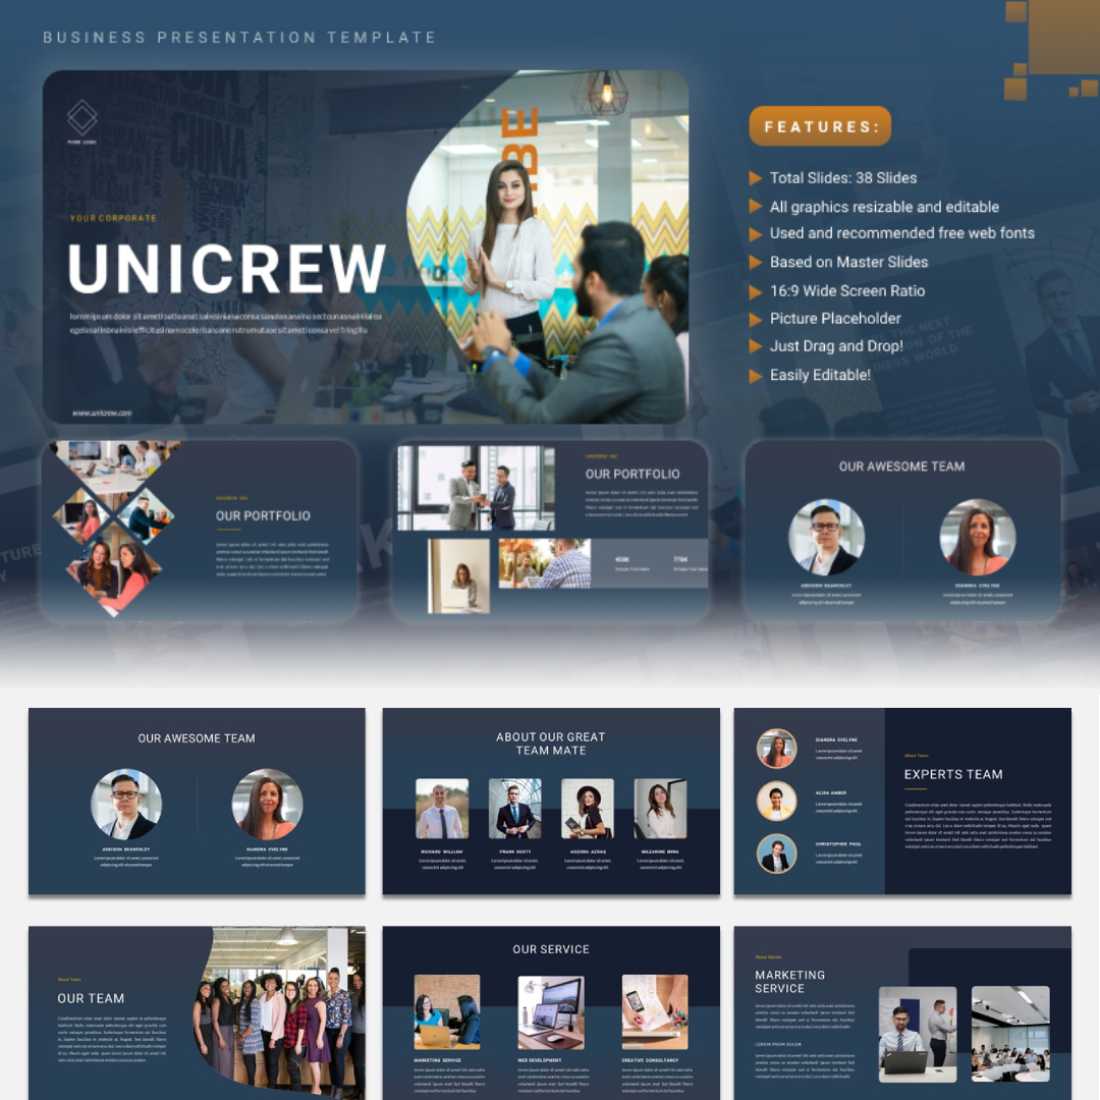 Unicrew - Business Multipurpose PowerPoint Presentation Template cover image.